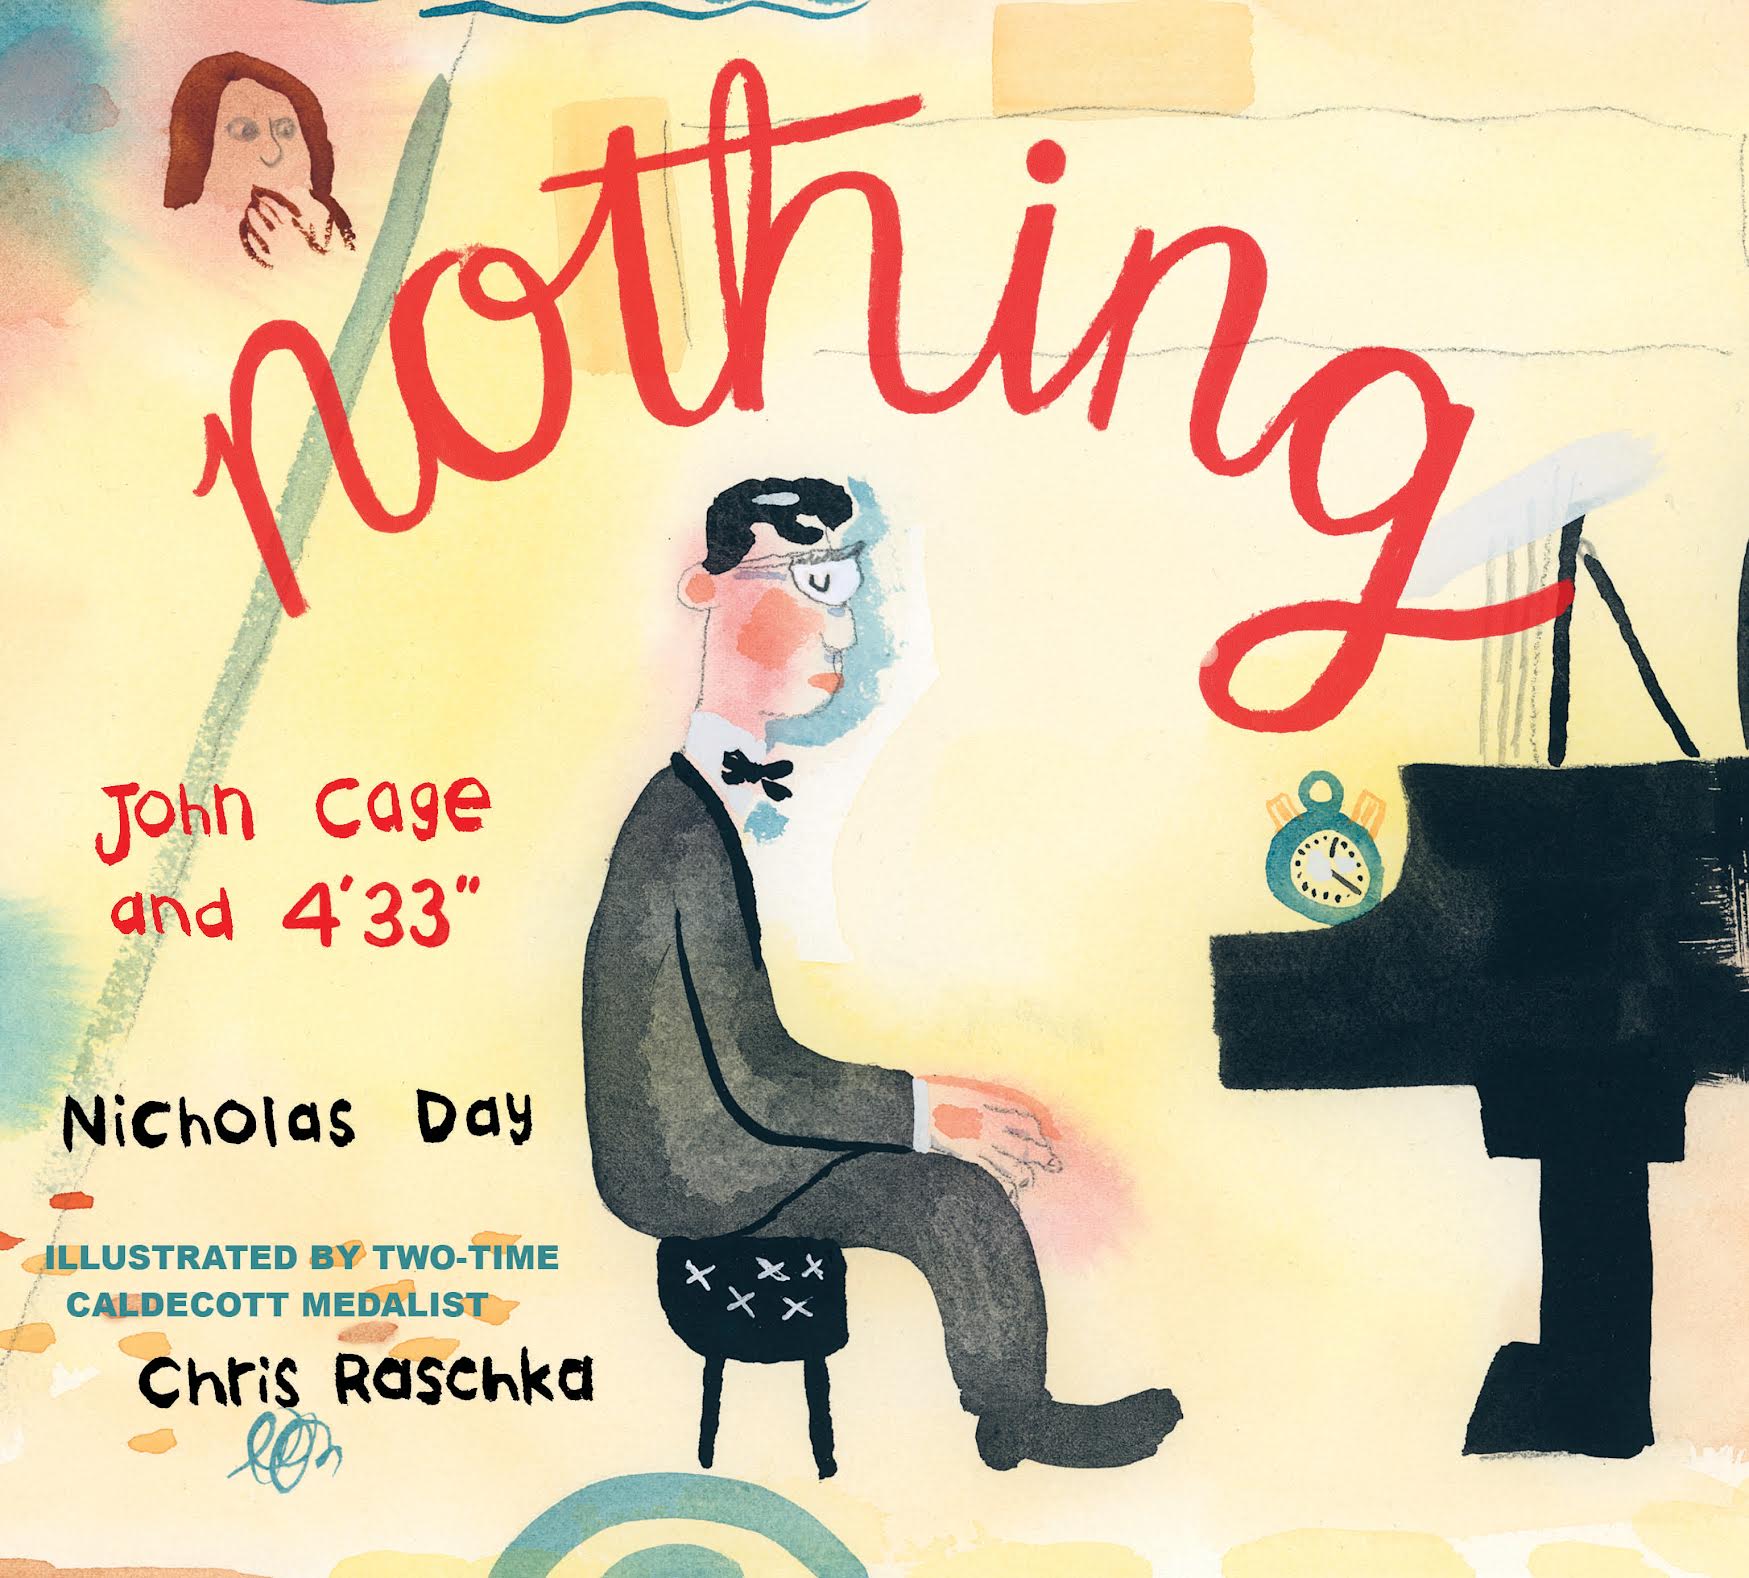 “The very unlikely Forrest Gump of the avant-garde.” A Nicholas Day Q&A about Nothing: John Cage and 4’33”